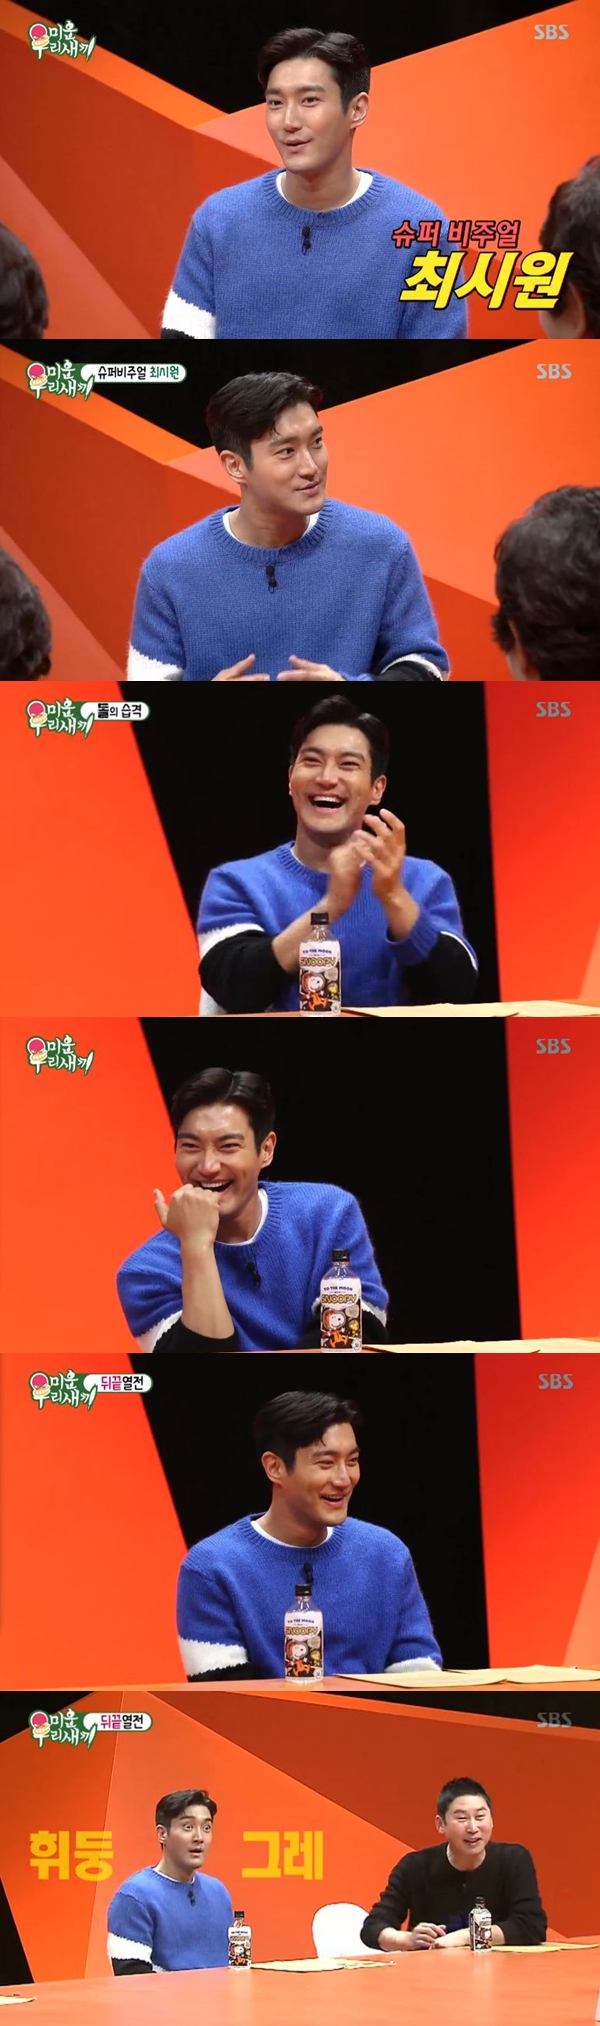 Choi Siwon reveals Kim Hee-chul secretSBS entertainment program My Little Old Boy (hereinafter referred to as My Little Old Boy), which was broadcast on the afternoon of the 24th, depicted Choi Siwon as a guest.Shin Dong-yeop asked, Who is the one who reminds me that I can not marriage with that son?Choi Siwon quietly said, Hee Chul is my brother. Kim Hee-chul Mother laughed, saying, Im going to be pissed.Choi Siwon said, I used a bed, I know a little bit of trouble because I used a bed with Mr. Hee-chul.If you use a bed with Mr. Hee-cheol, you should not cross the line. If you cross the line, your feet will fly.Meanwhile, My Little Old Boy (hereinafter referred to as My Little Old Boy) is a program in which a mother becomes a speaker, observes the daily life of the son, and records the moment through a device called a child care diary.It airs every Sunday at 9:05 p.m.